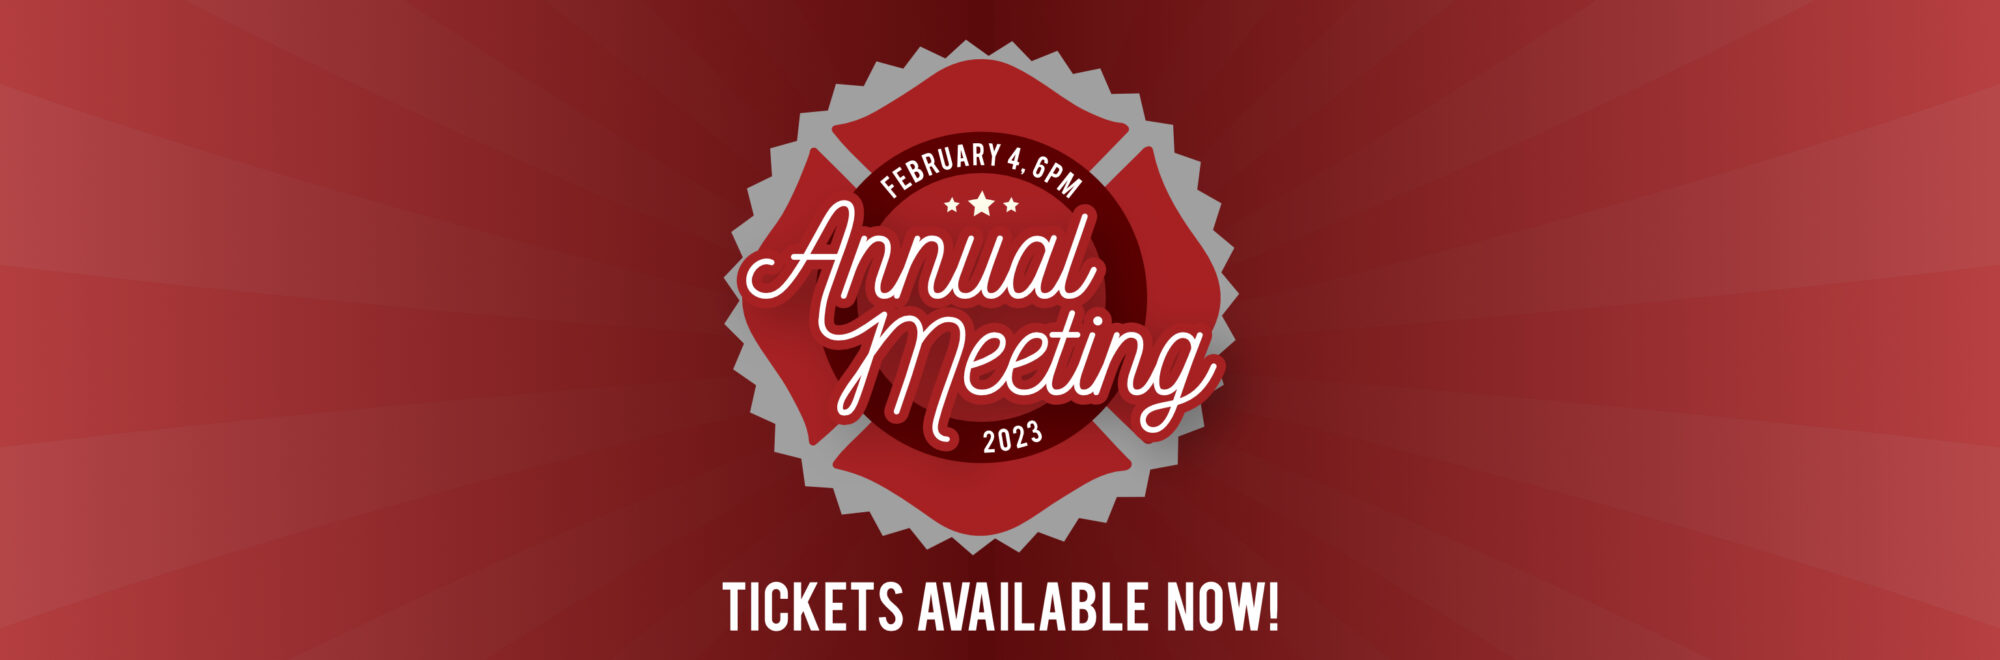 2023 Credit Union Annual Meeting & Dinner